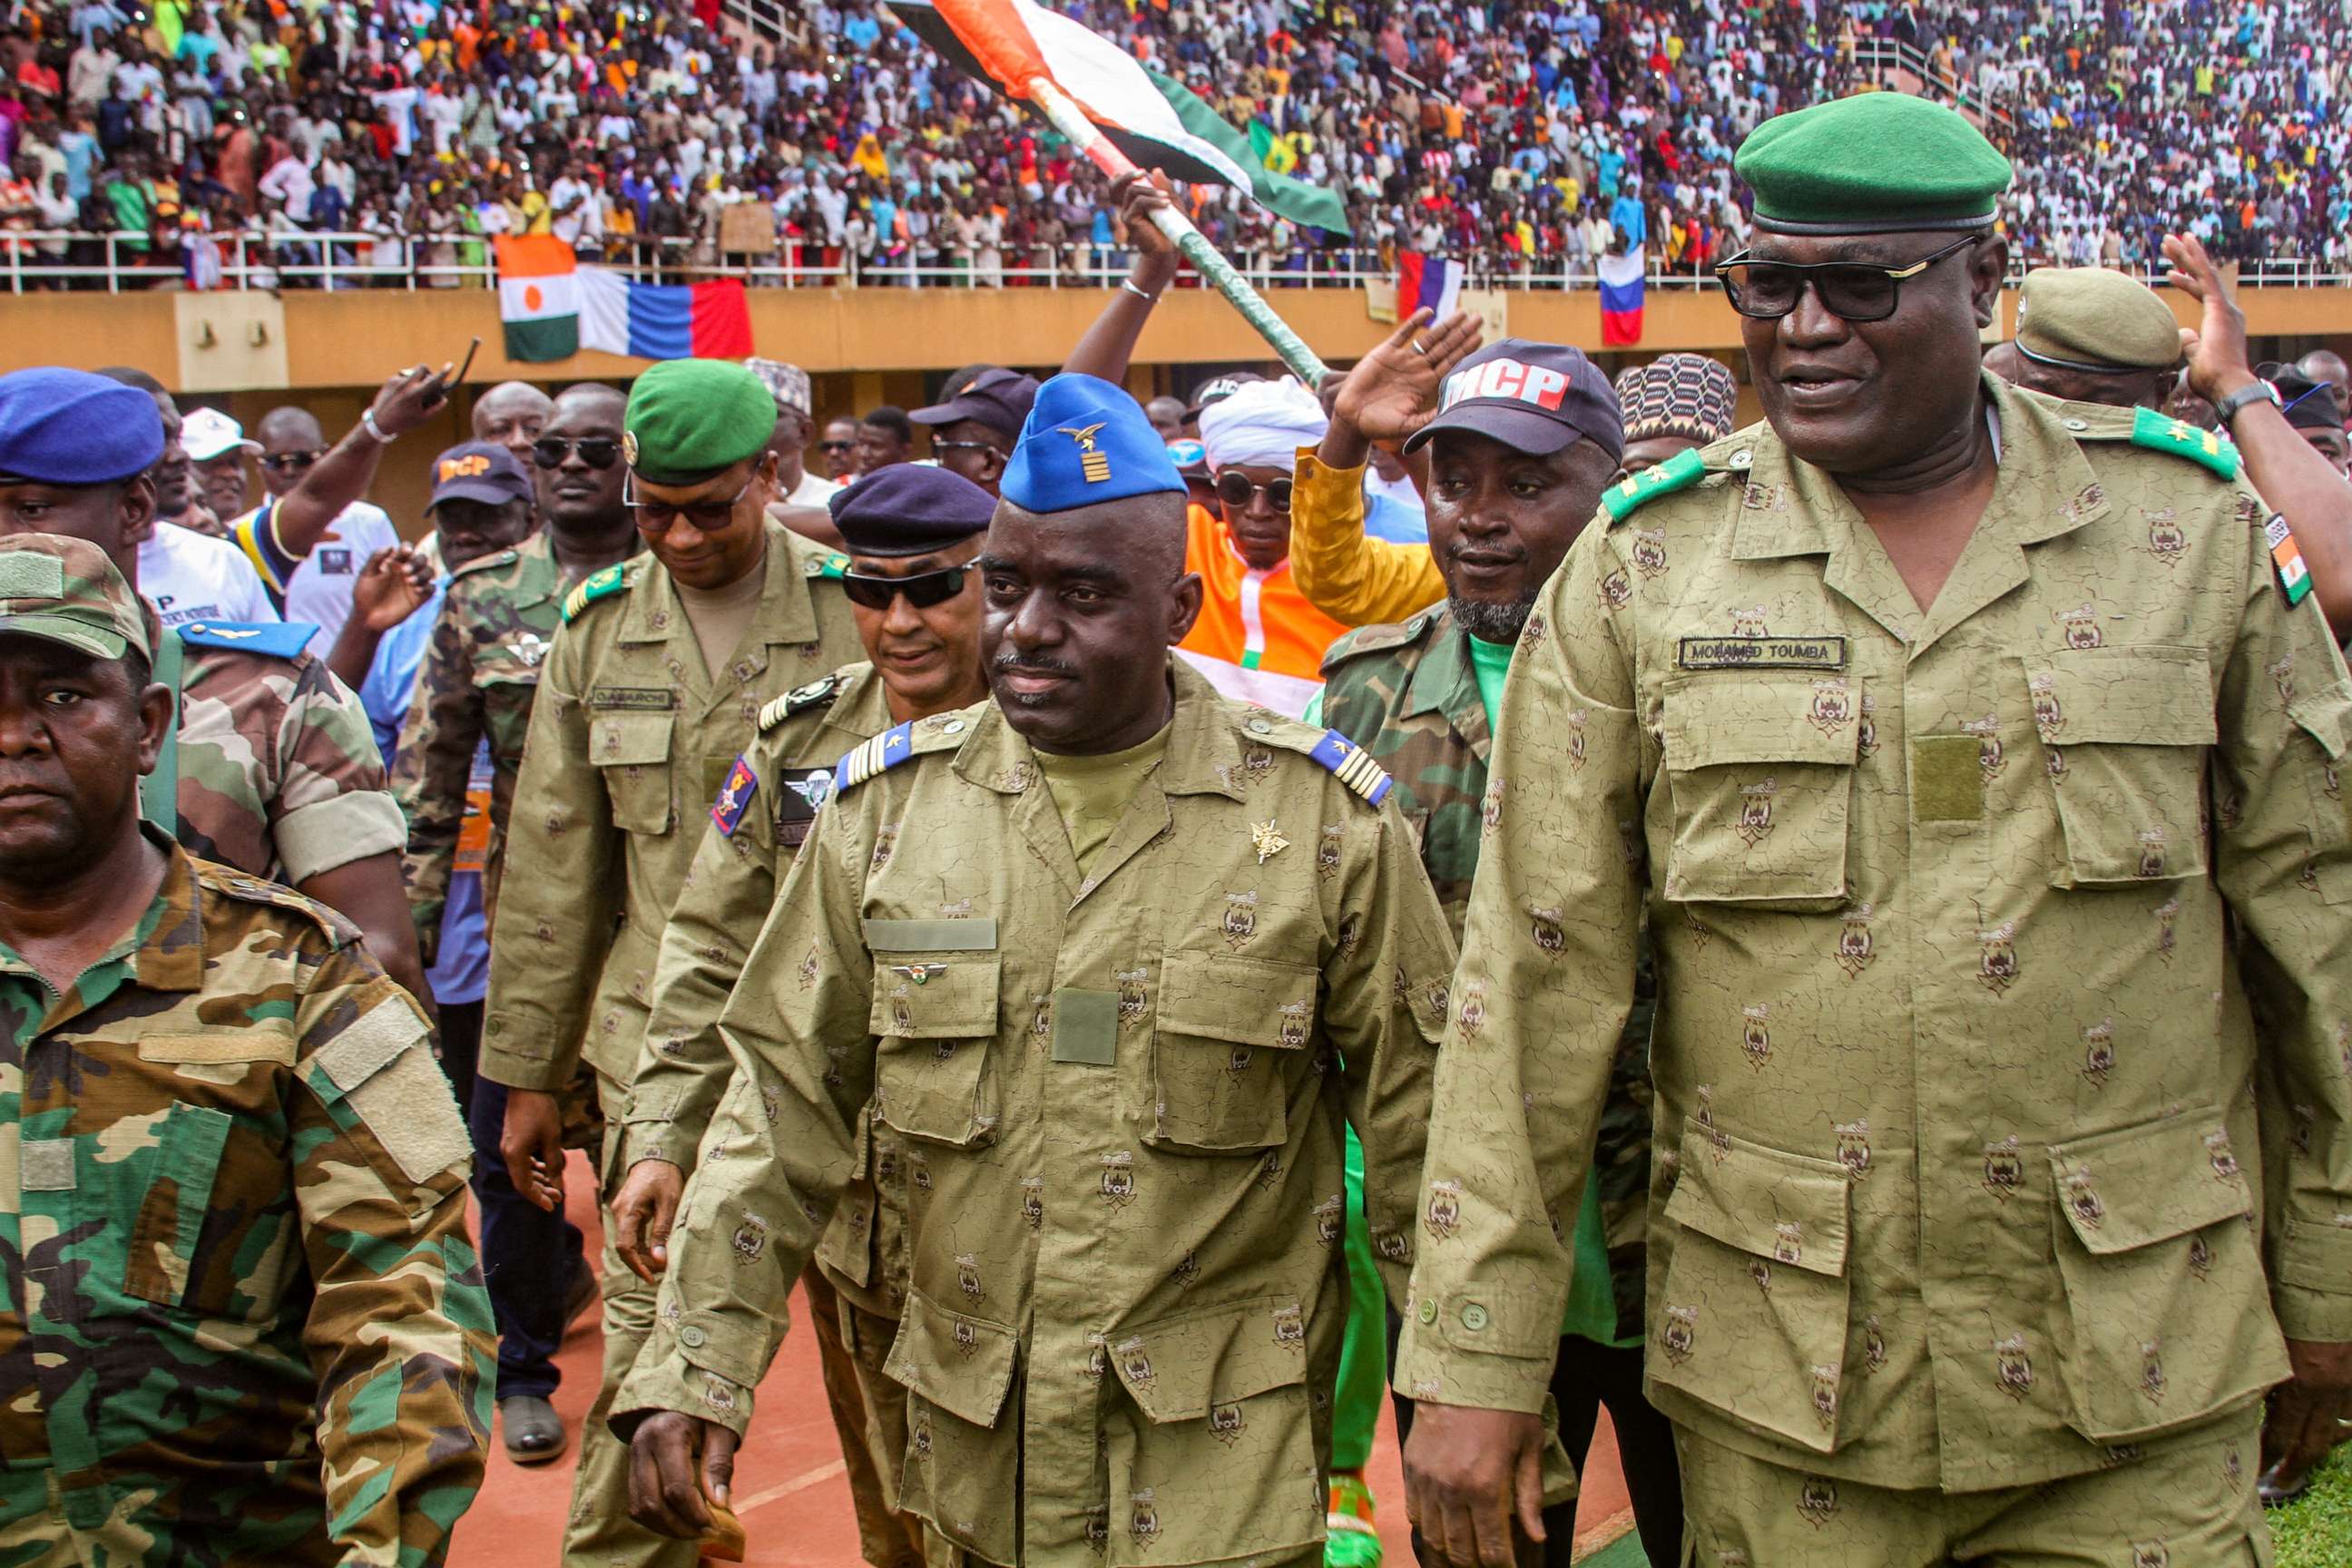 FILE PHOTO: Members of a Nigerien military council that staged an apparent coup attend a rally at a stadium in Niamey, Niger, on Aug. 6, 2023.